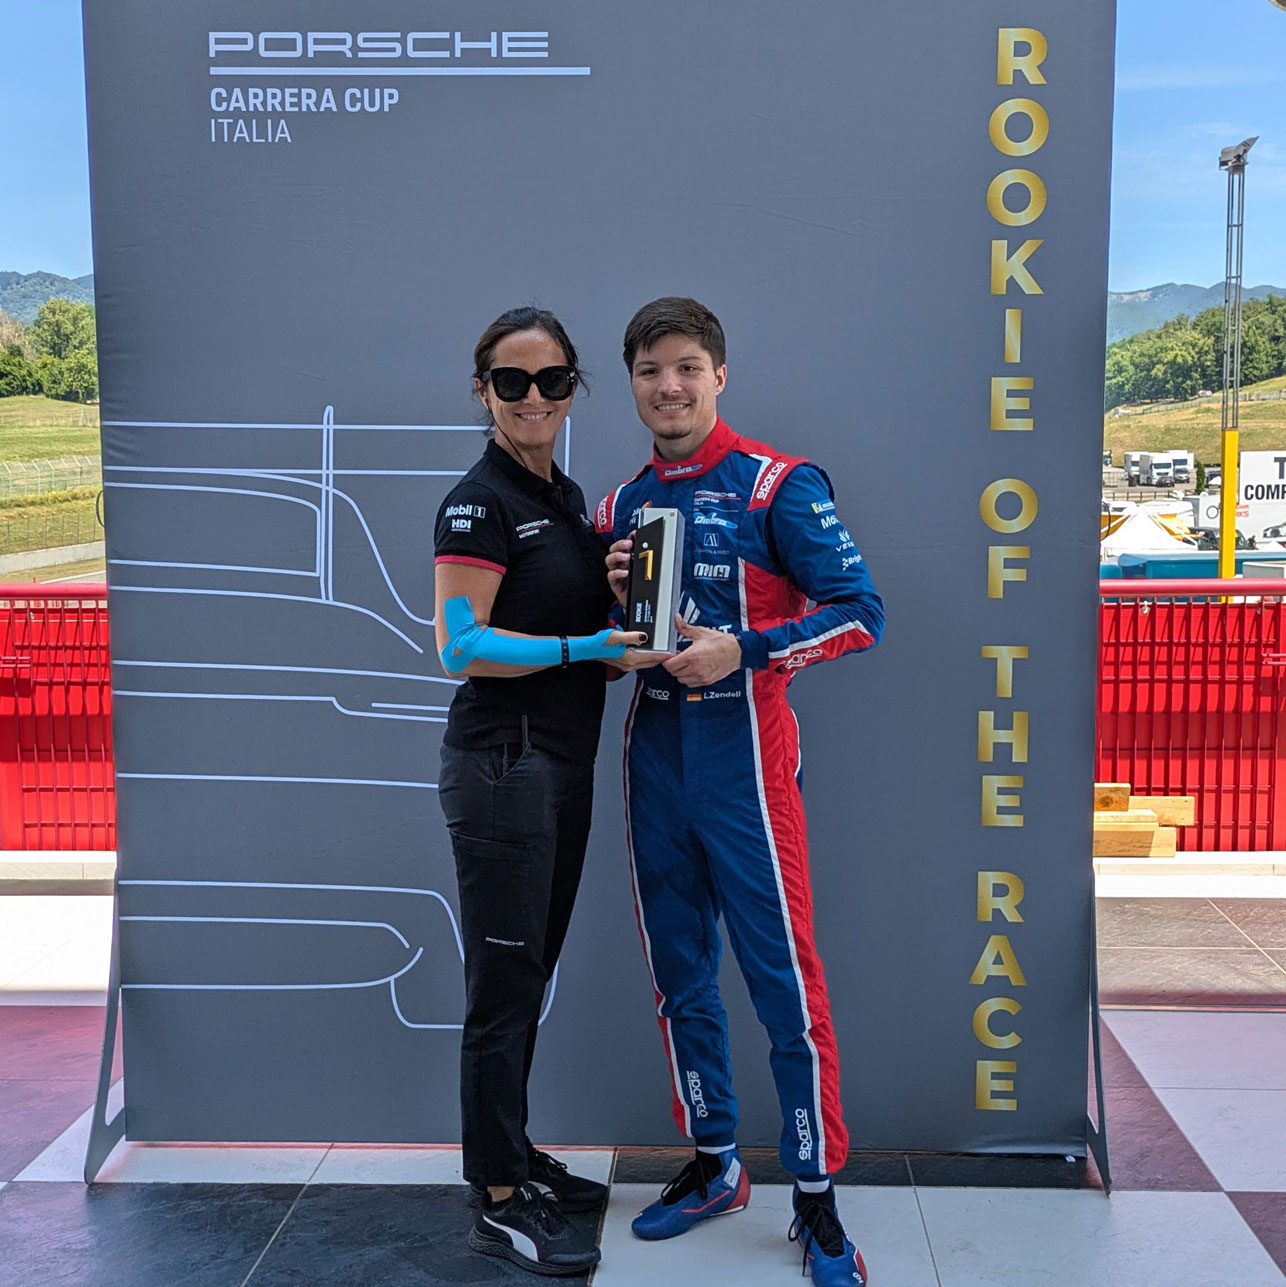 ZENDELI NOTCHES UP MORE PCCI POINTS WITH FIFTH PLACE IN ROUND 6 AT MUGELLO